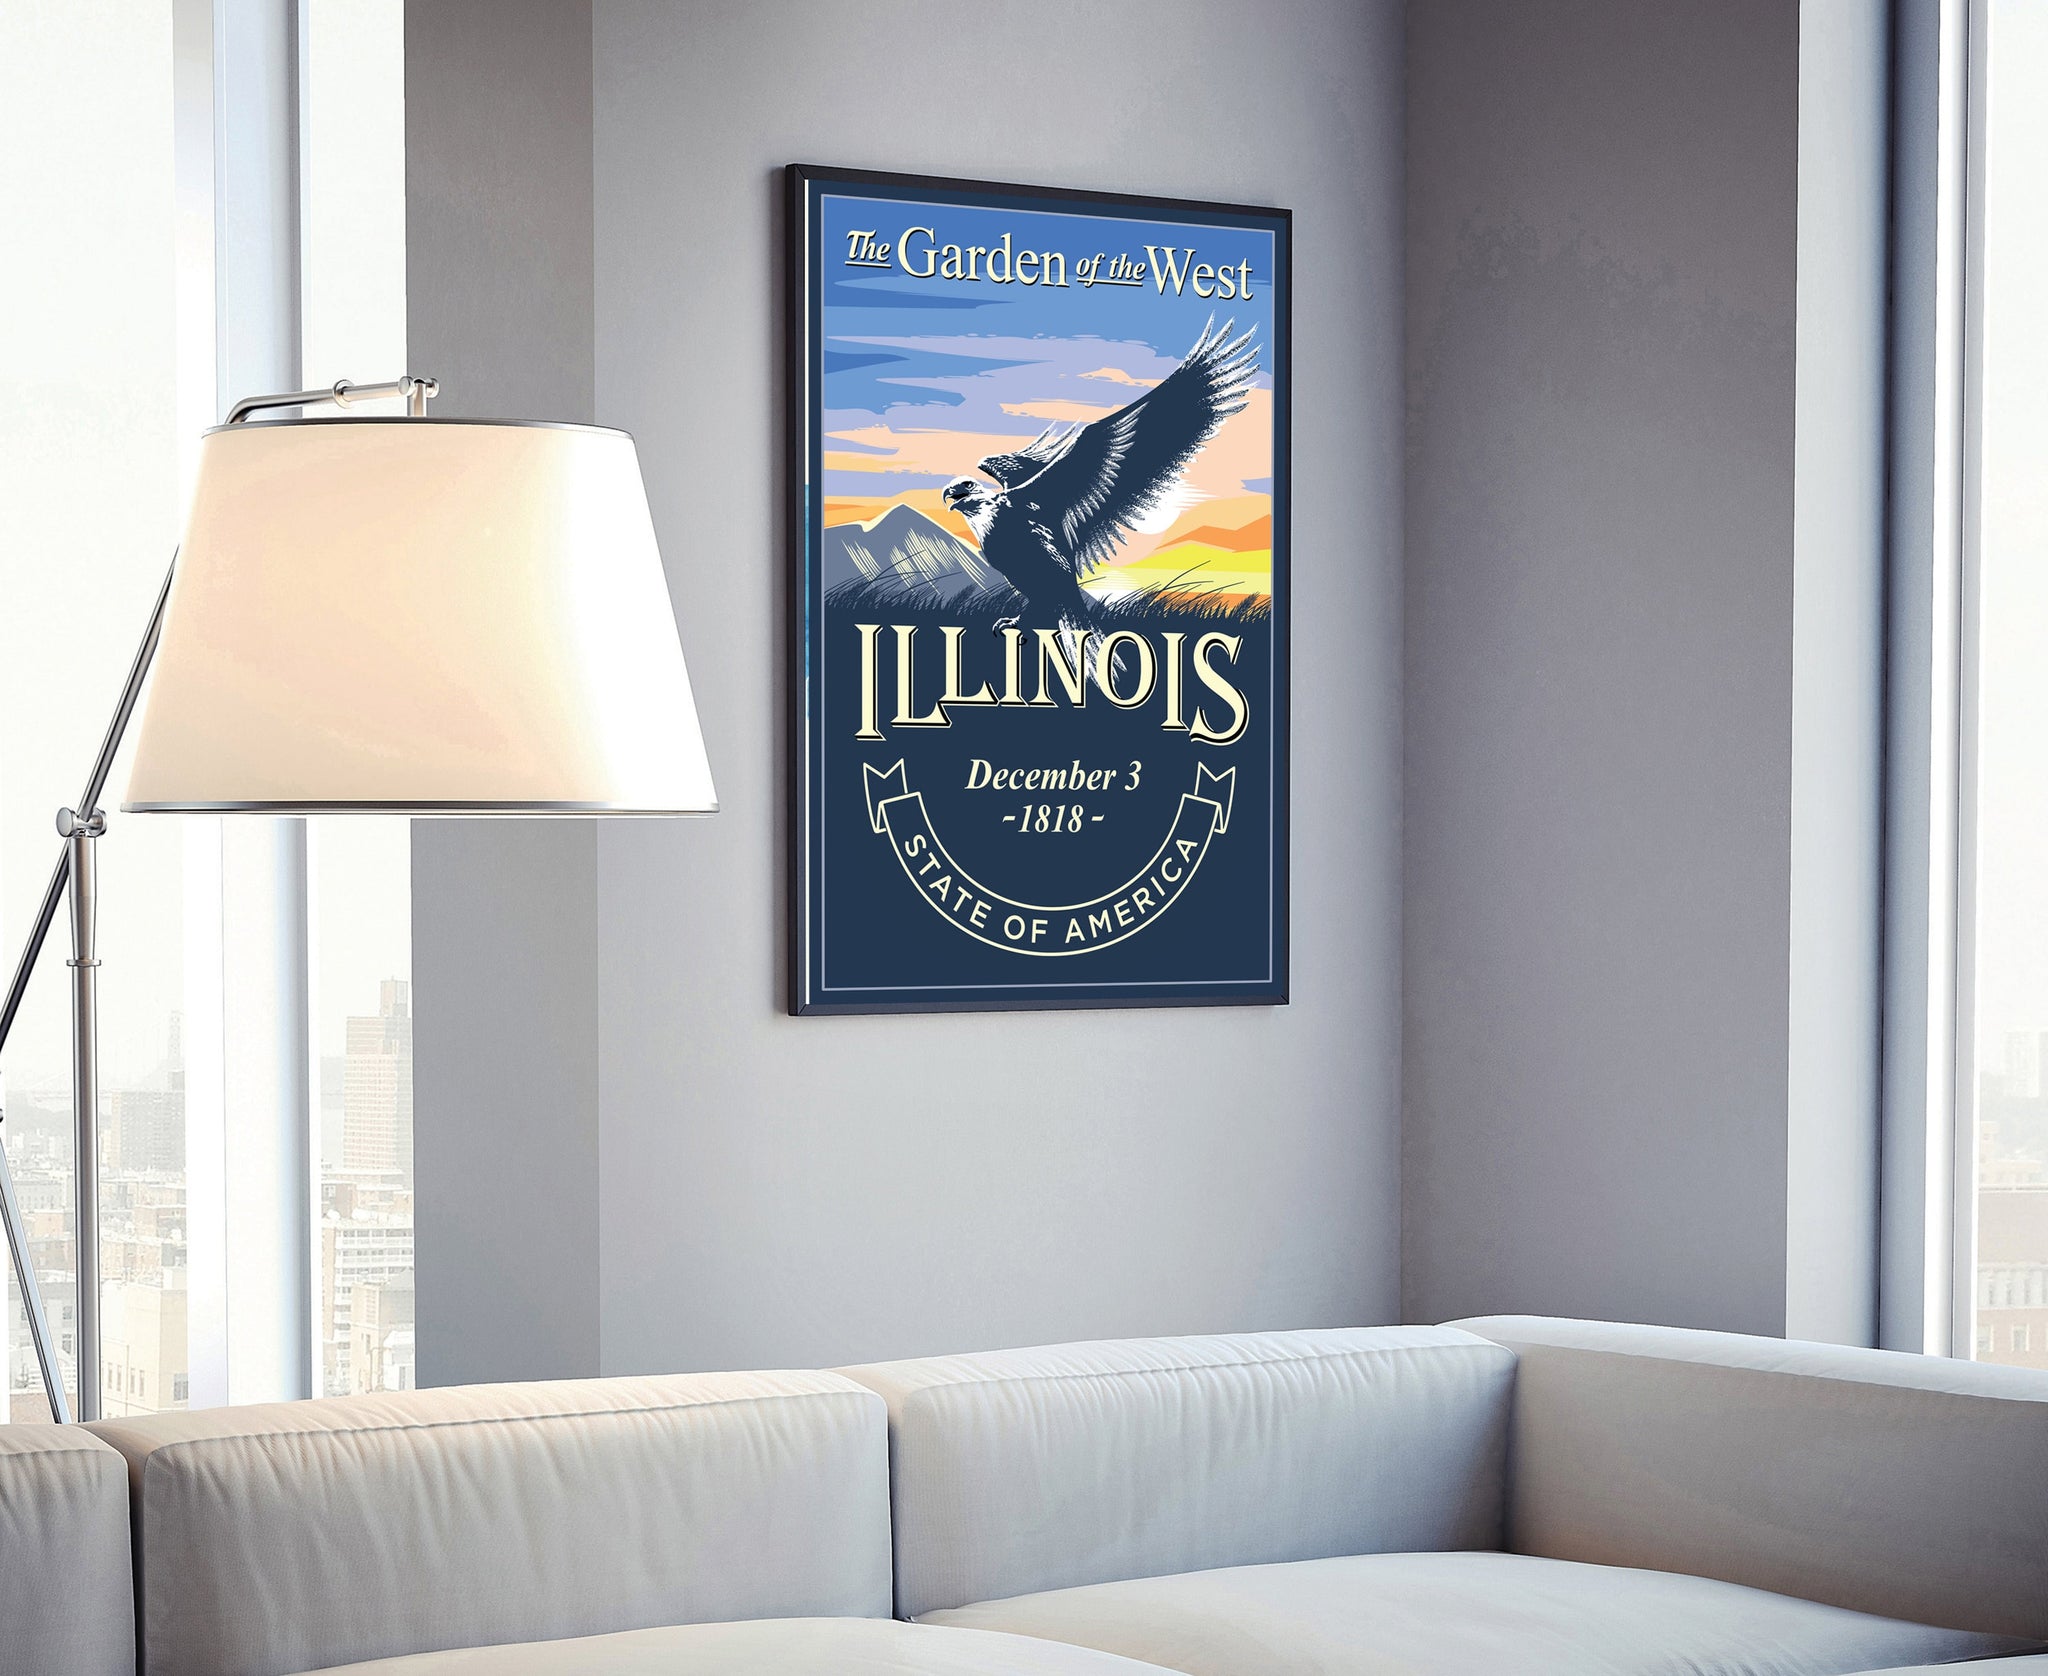 United States Illinois State Poster, Illinois Poster Print, Illinois State Emblem Poster, Retro Travel State Poster, Home Office Wall Art